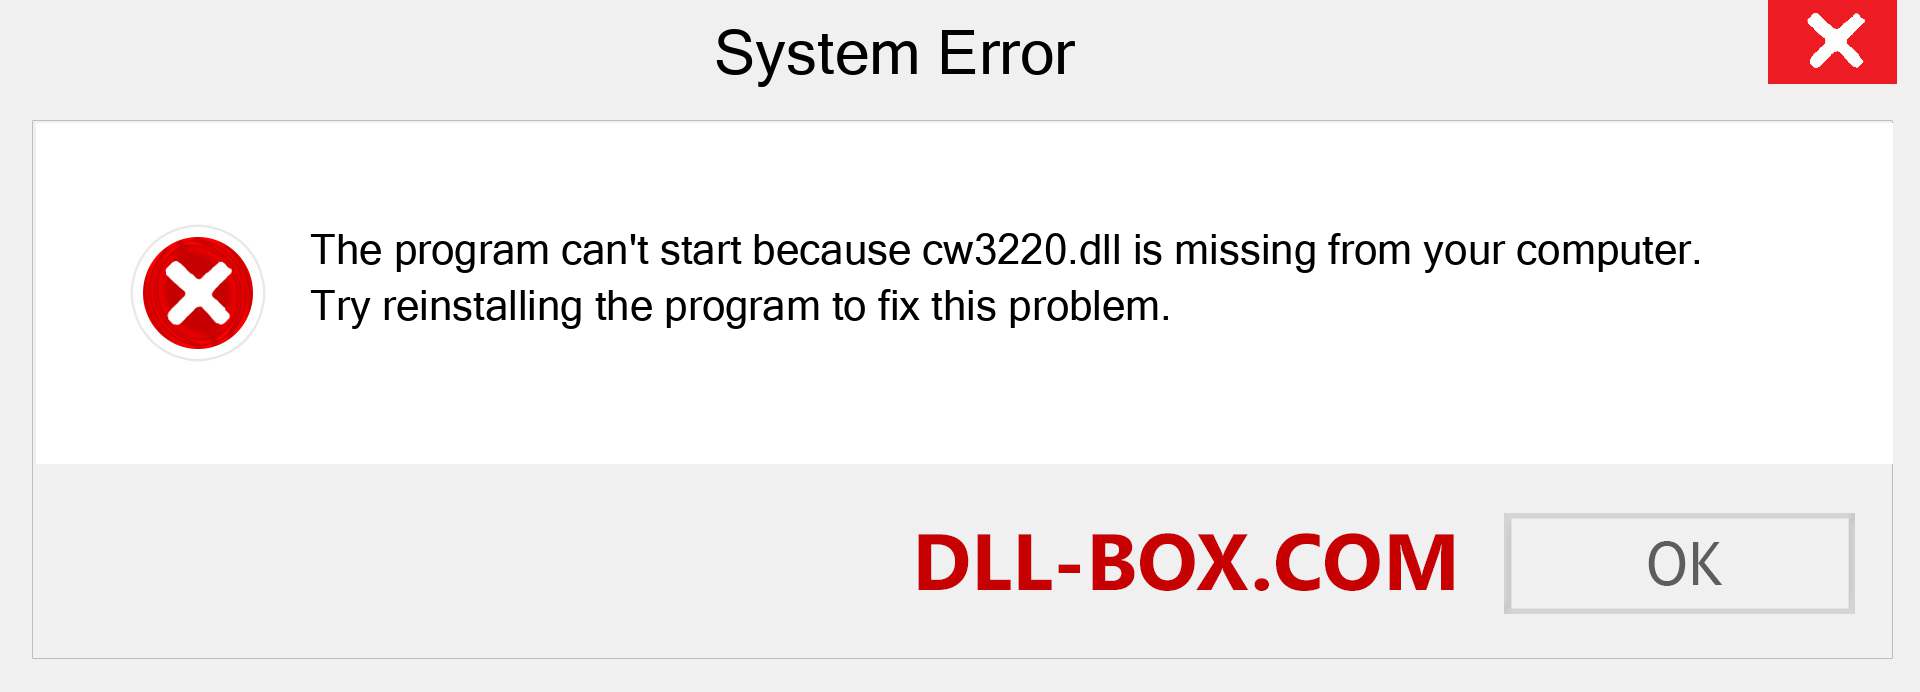  cw3220.dll file is missing?. Download for Windows 7, 8, 10 - Fix  cw3220 dll Missing Error on Windows, photos, images